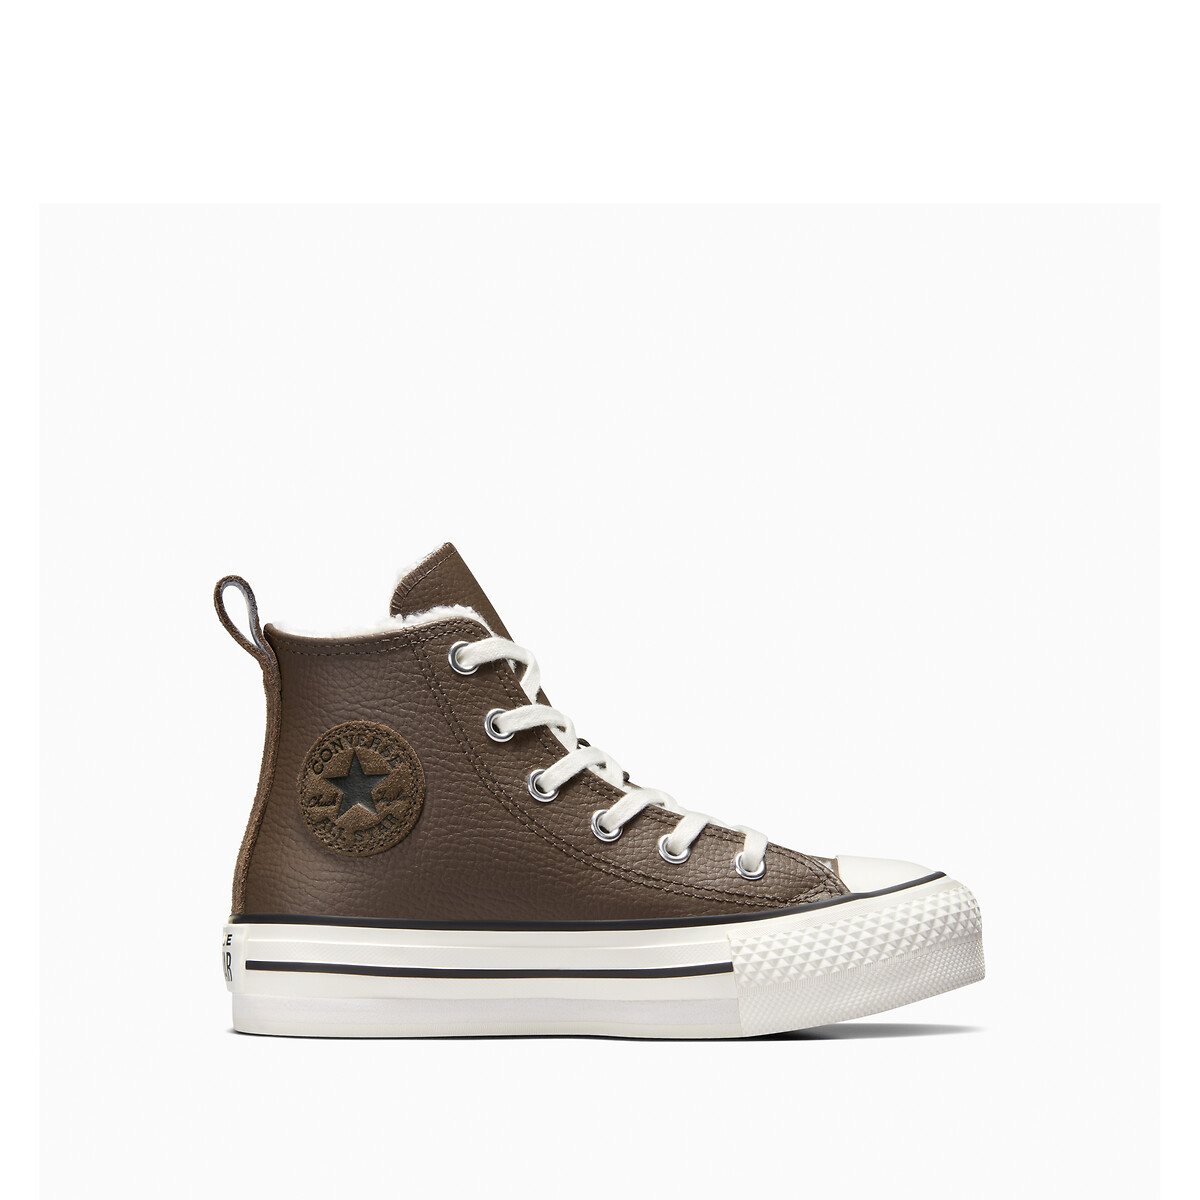 Kids All Star Eva Lift Warm Winter Leather High Top Trainers